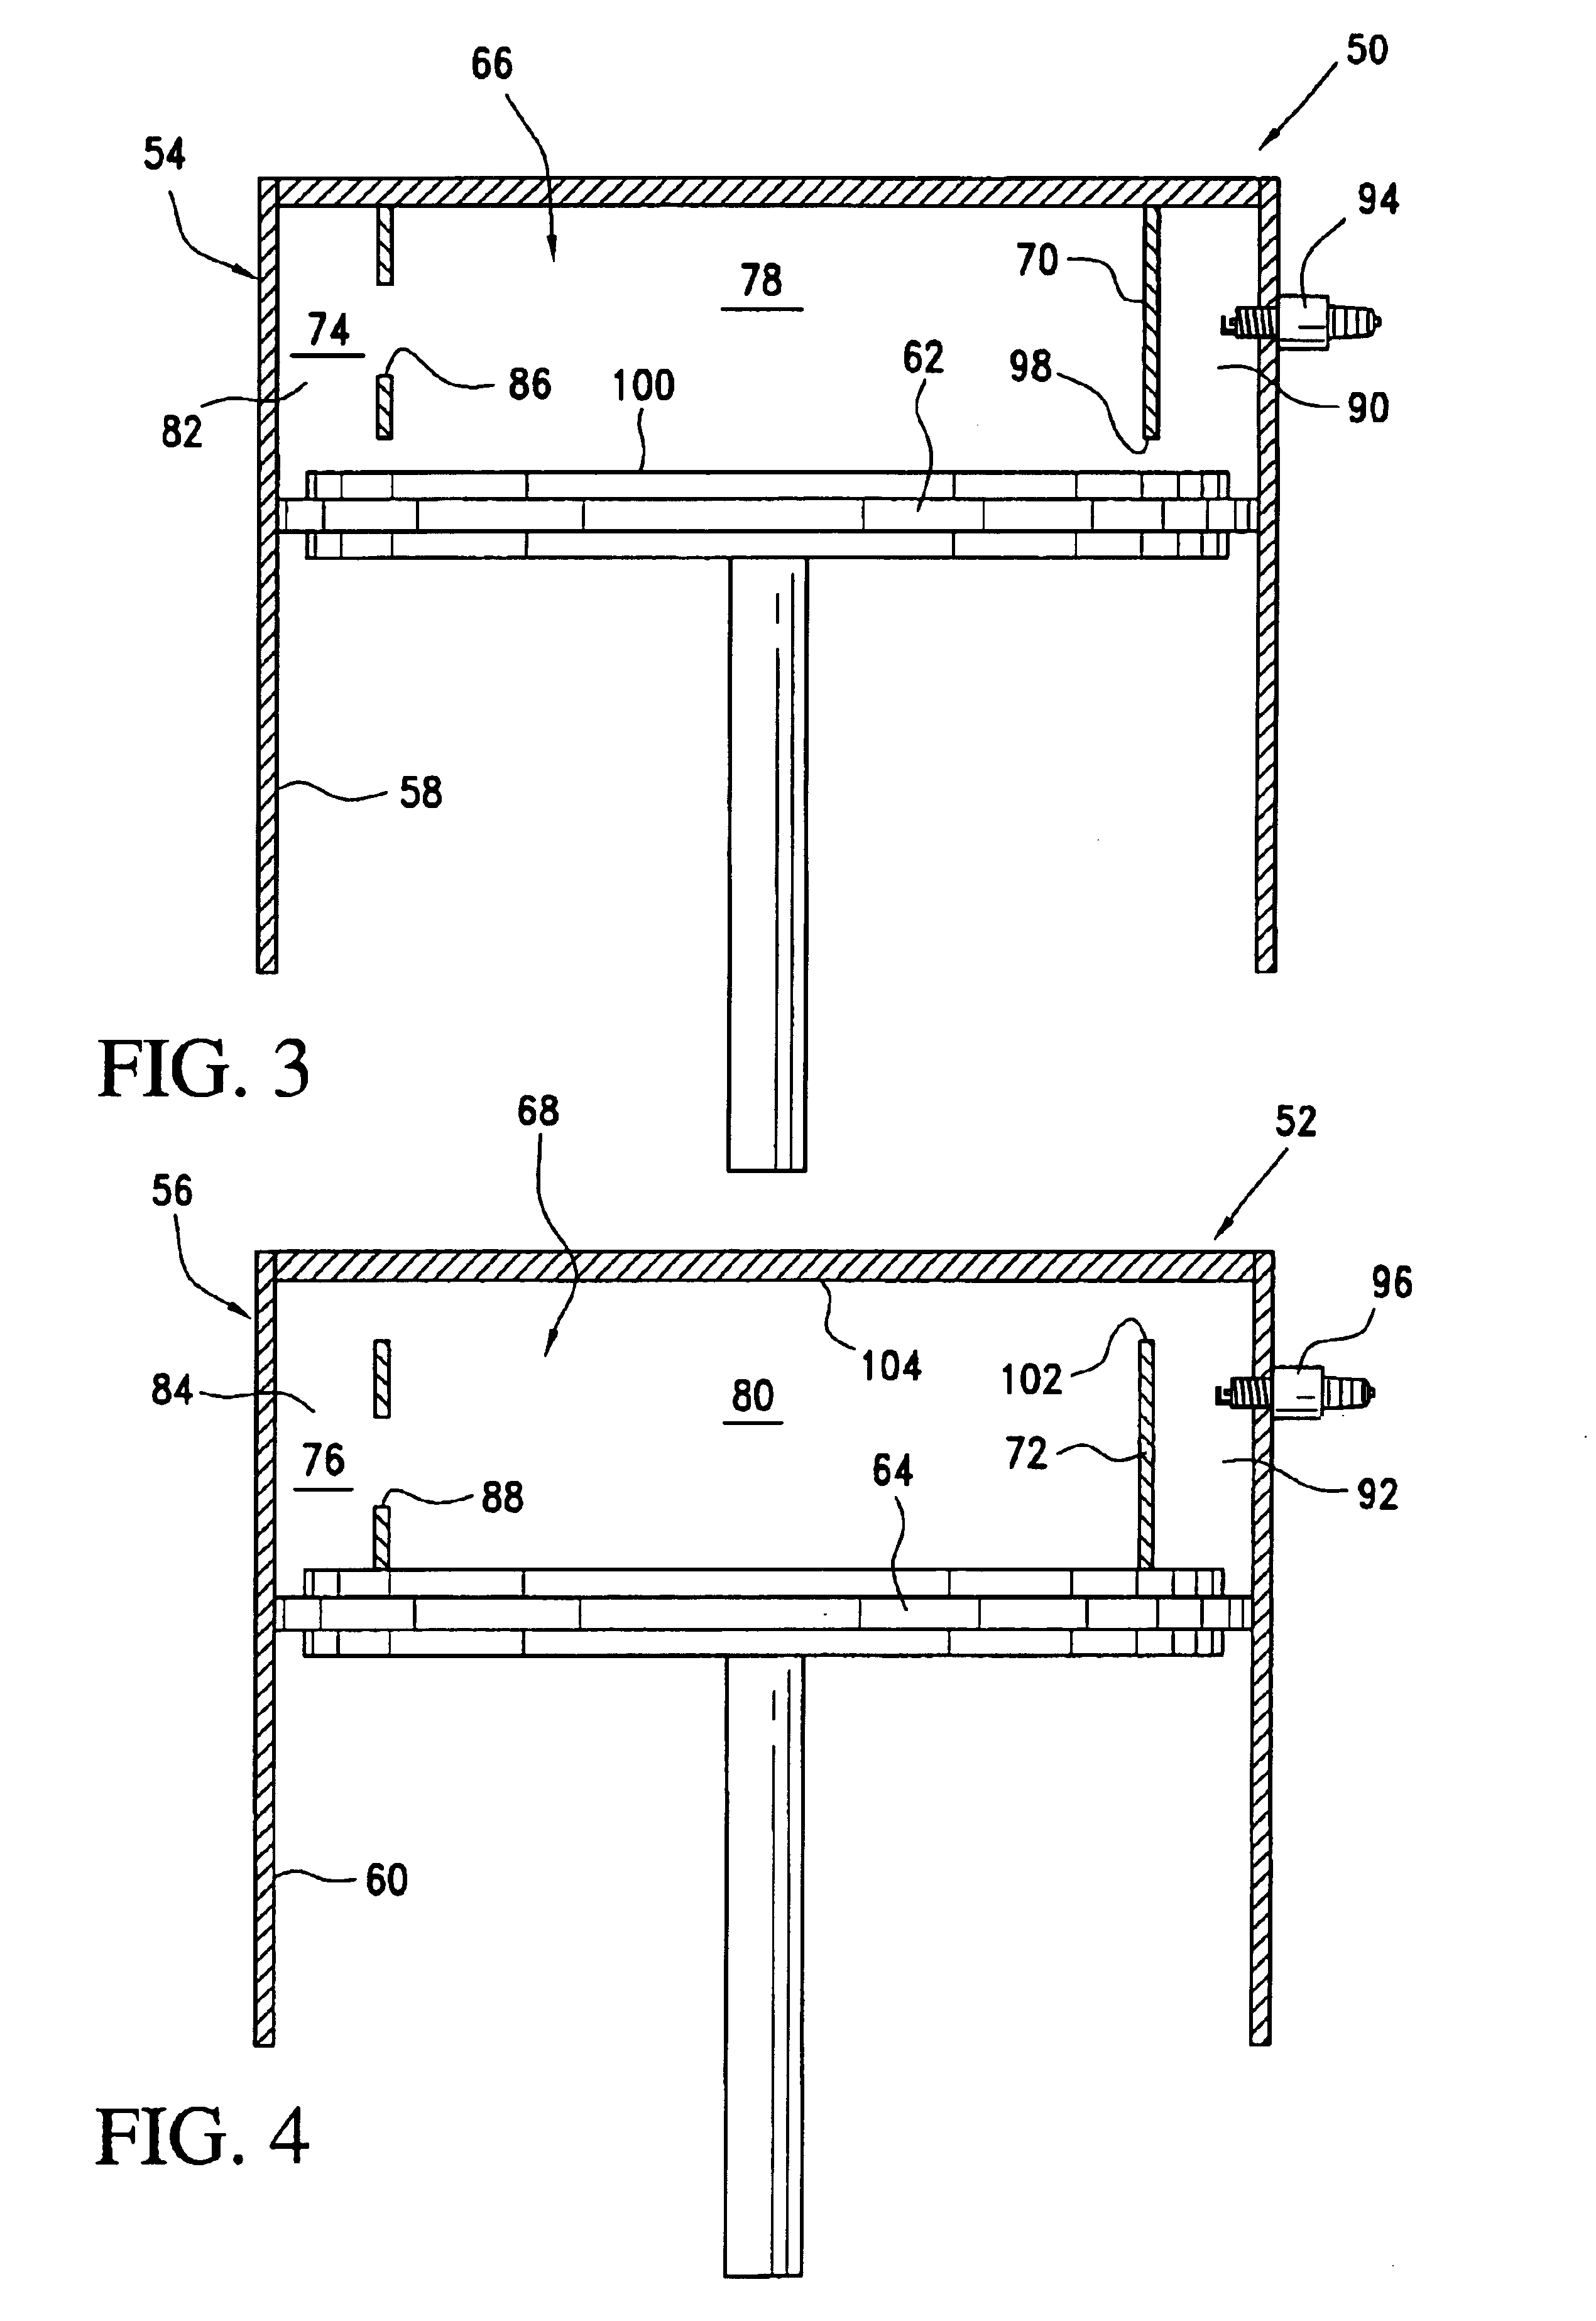 Multiple-front combustion chamber system with a fuel/air management system